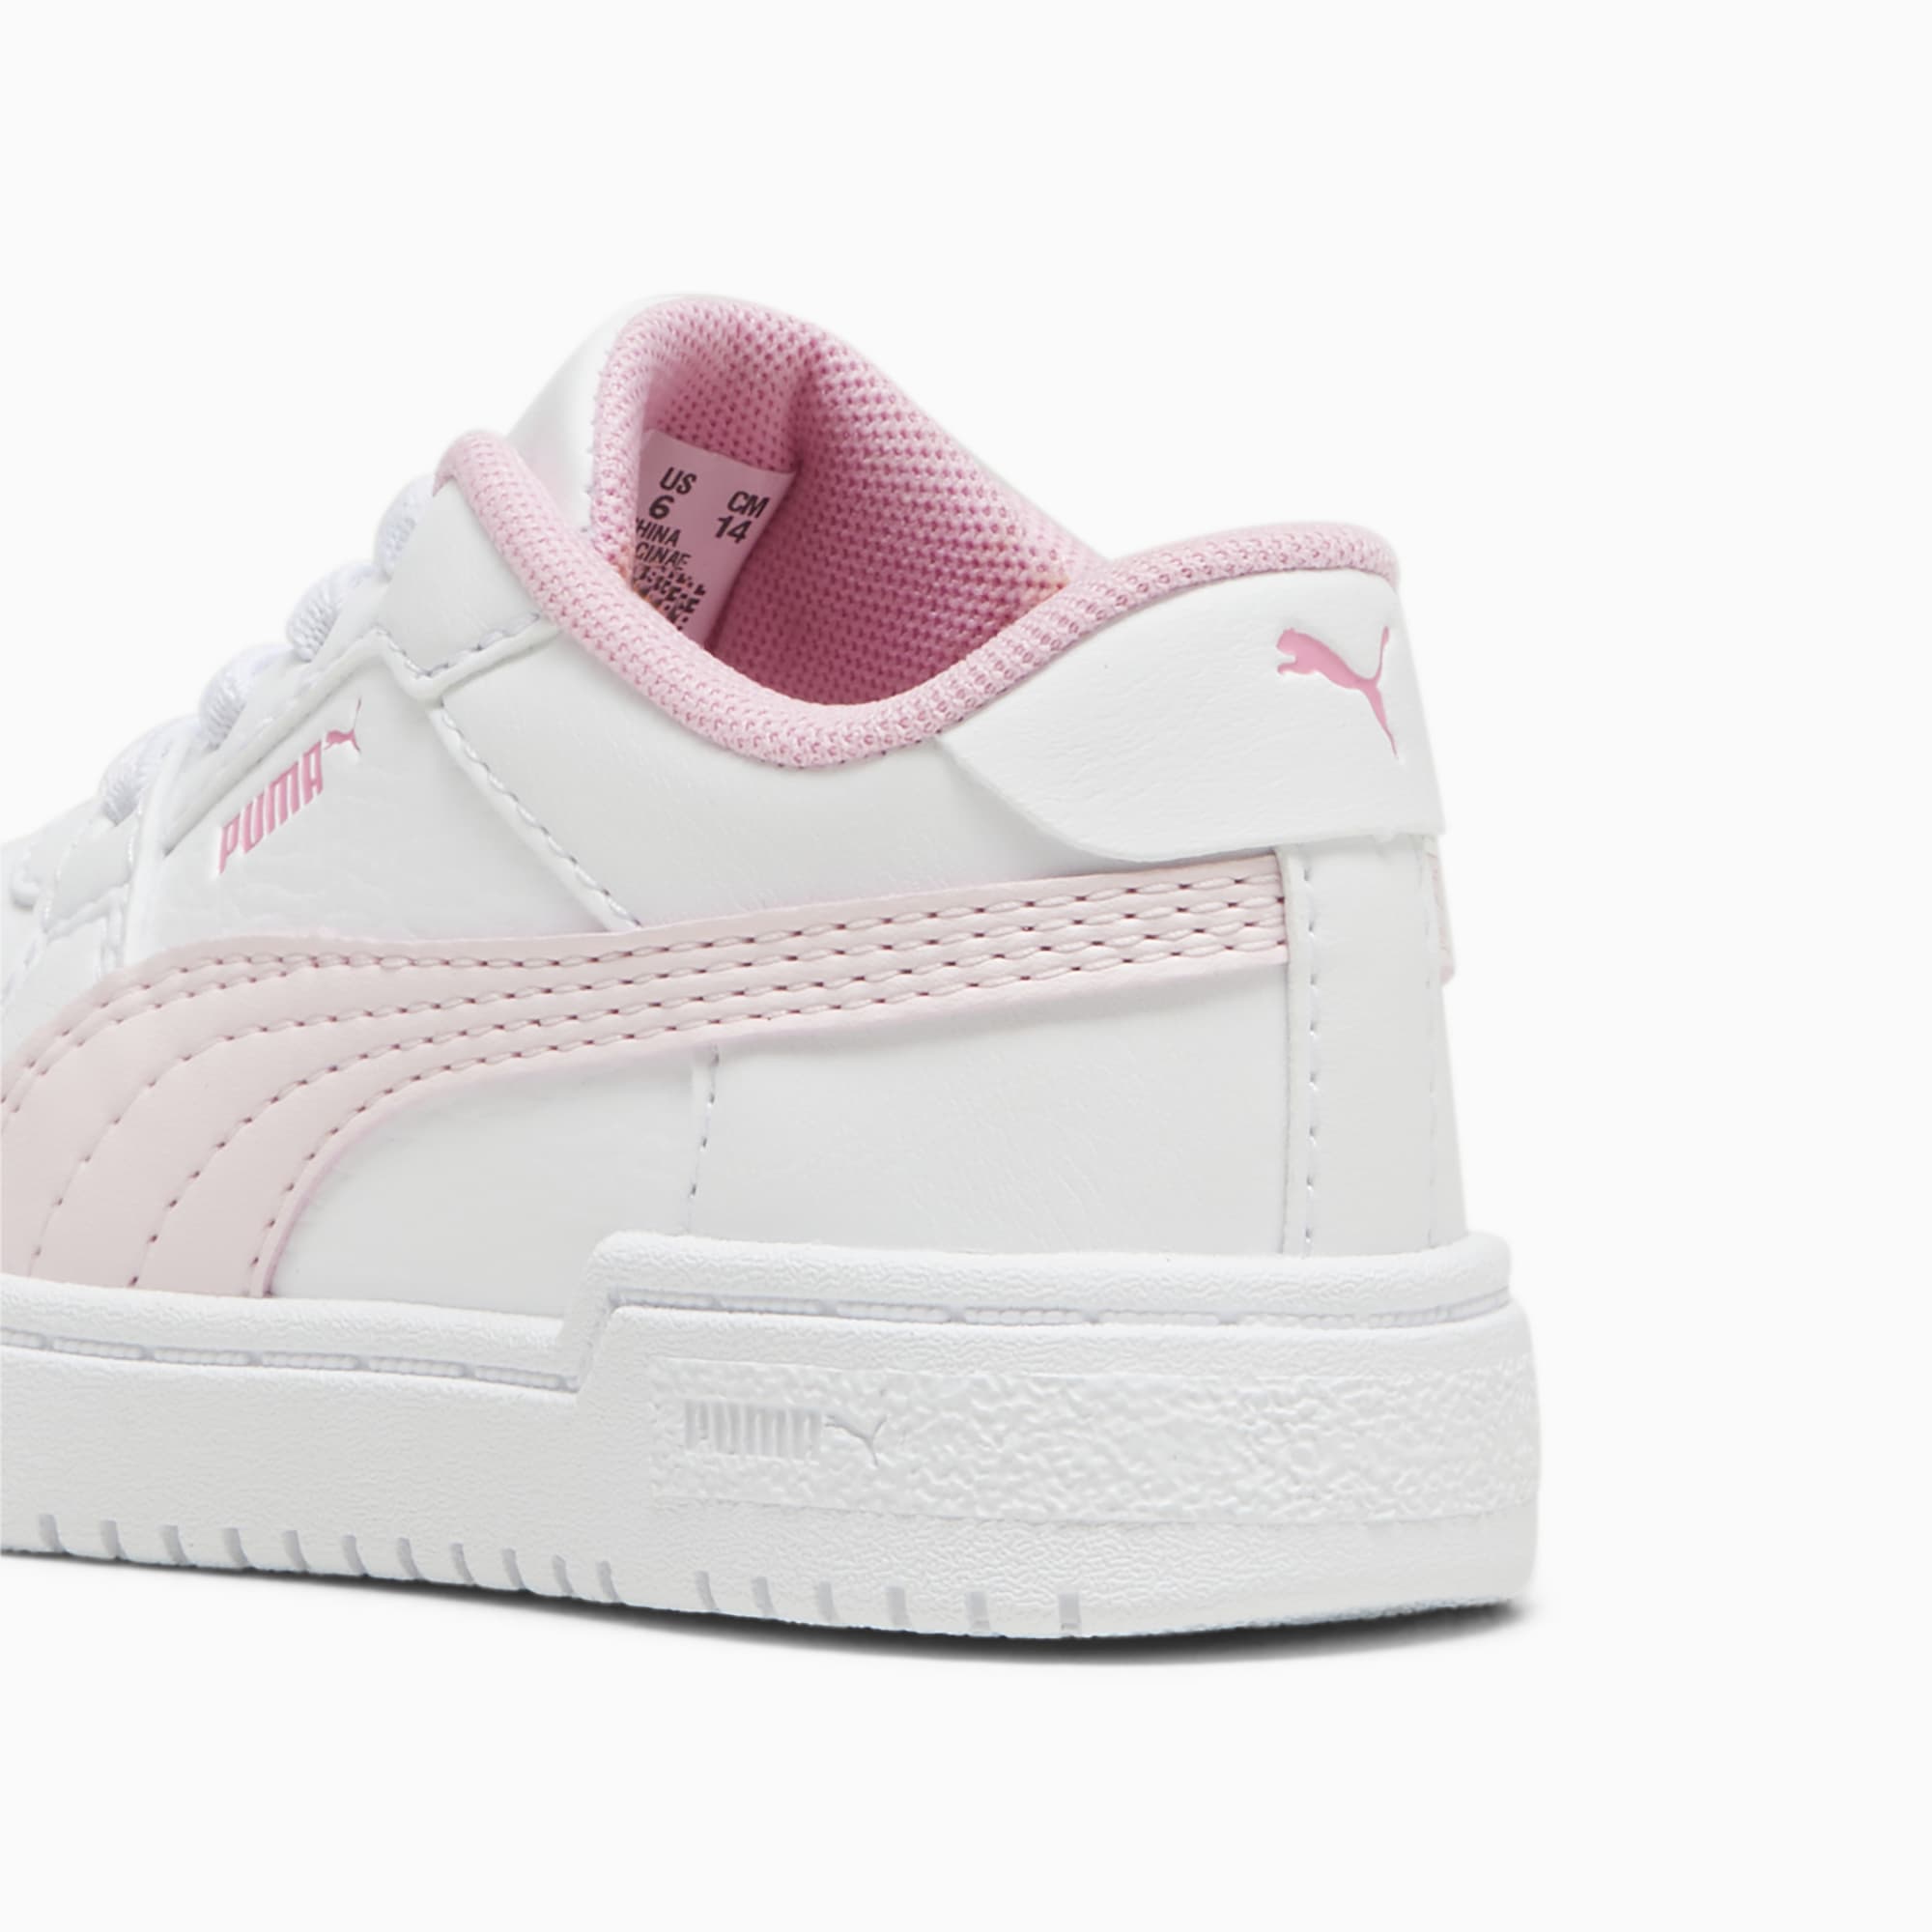 PUMA Ca Pro Classic AC Babies' Trainers, White/Whisp Of Pink